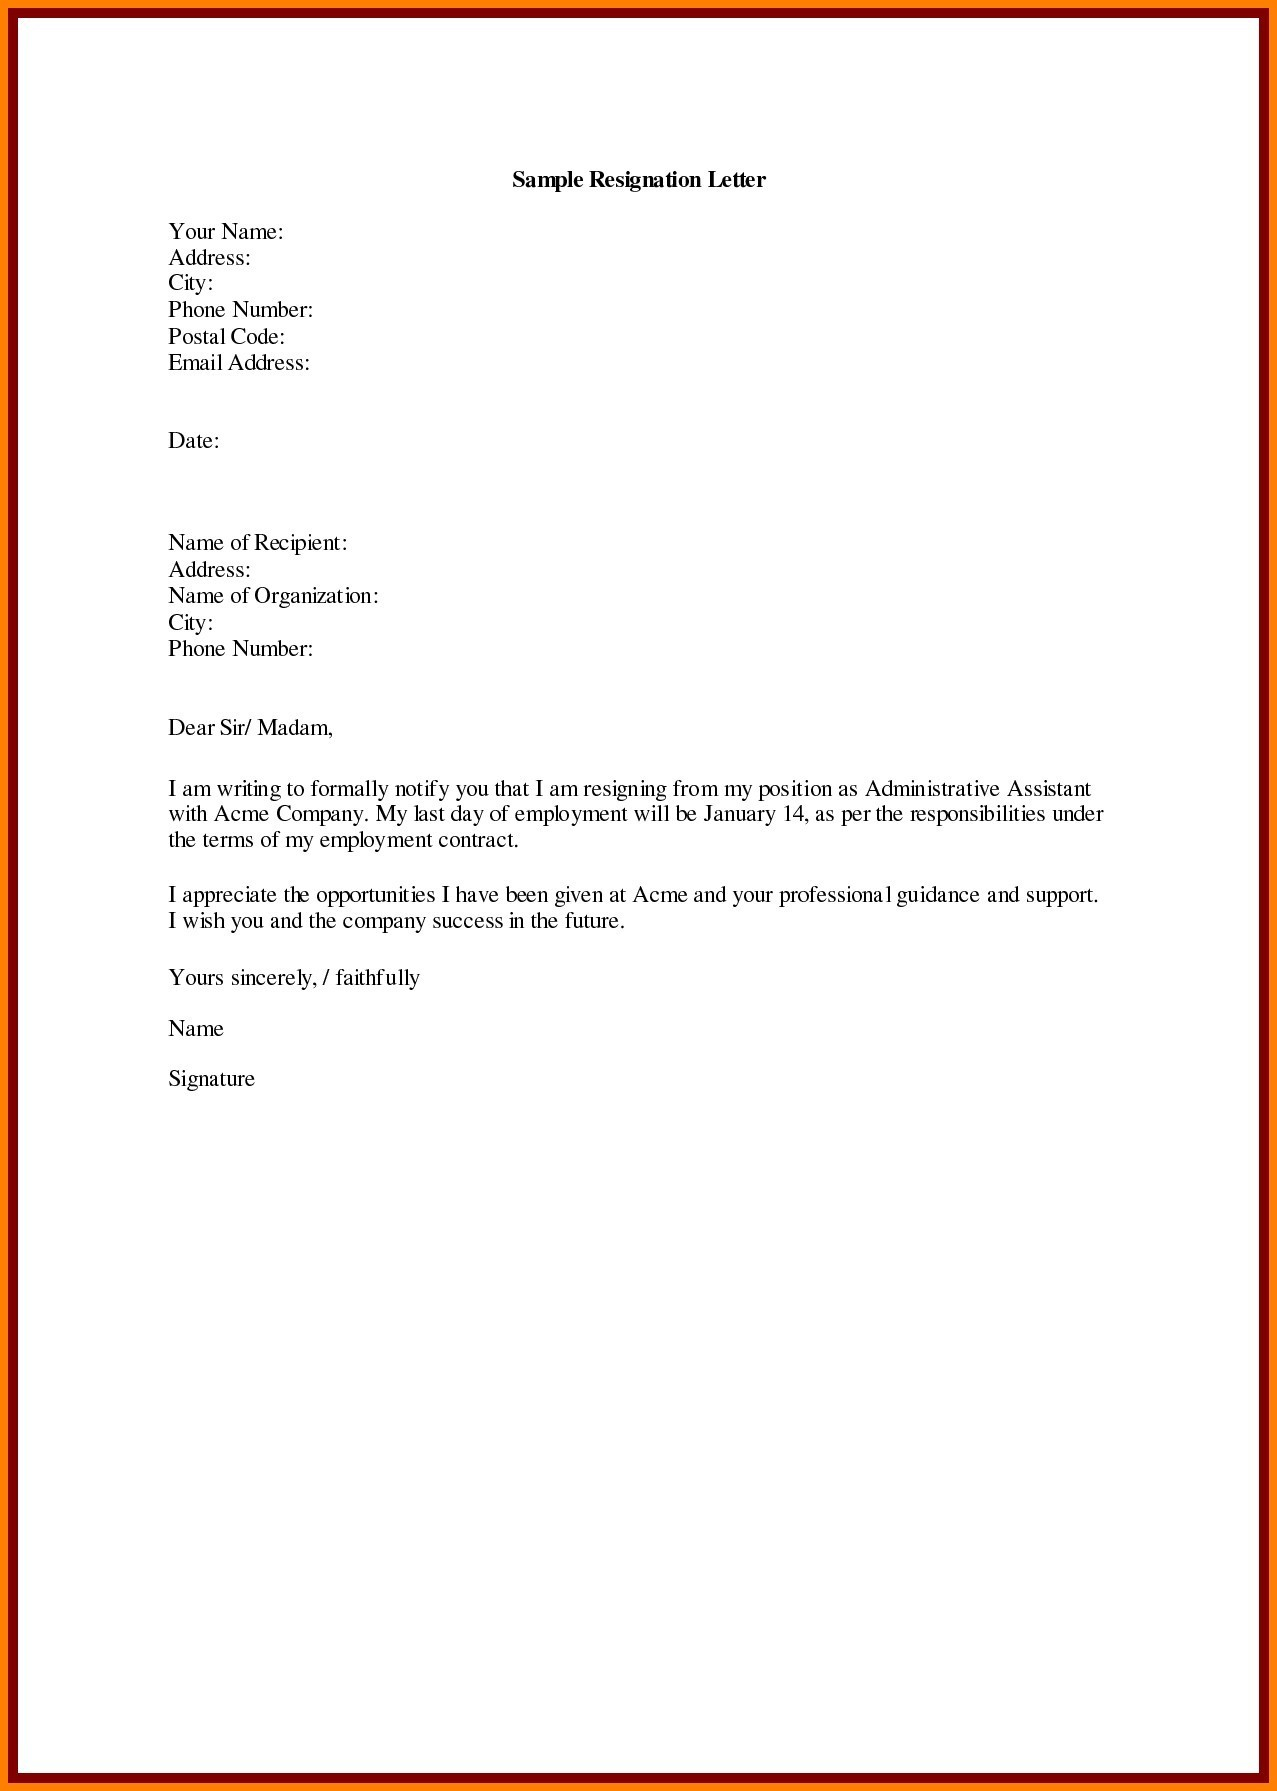 Writing A Resignation Letter Template - Sample Resignation Letter Template Doc Copy Samples Resignation